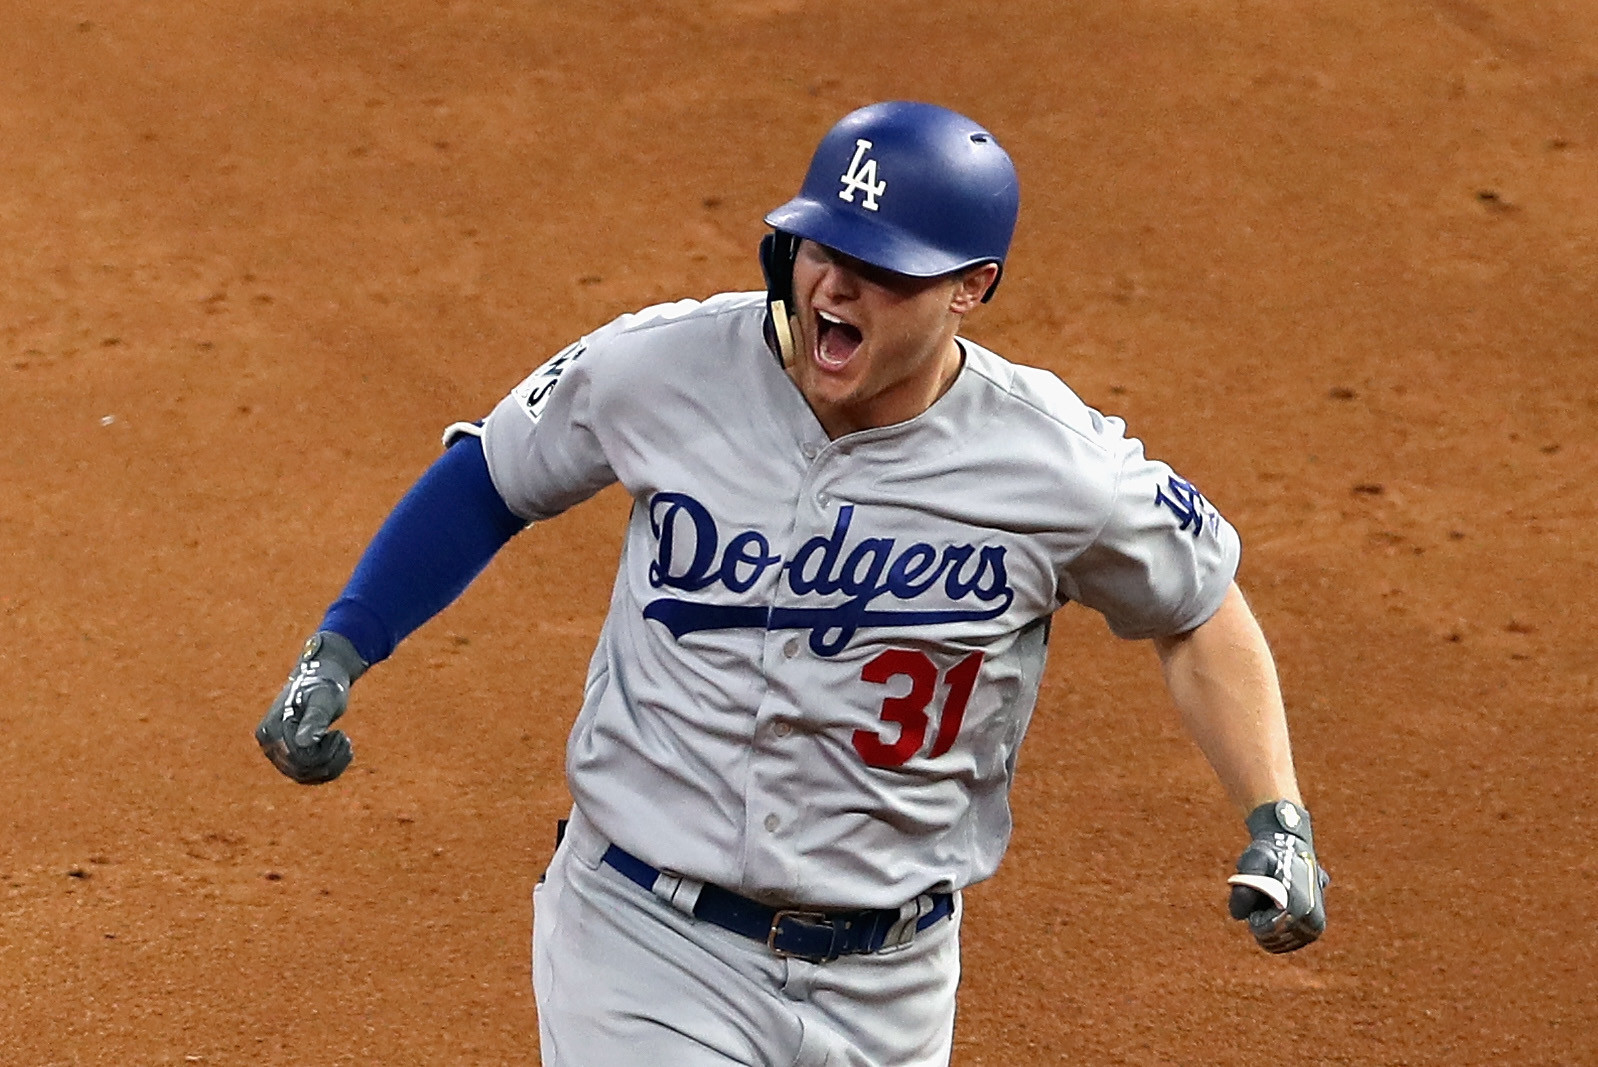 Dodgers Dugout: The rise, fall and rise again of Joc Pederson - LA Times1598 x 1067